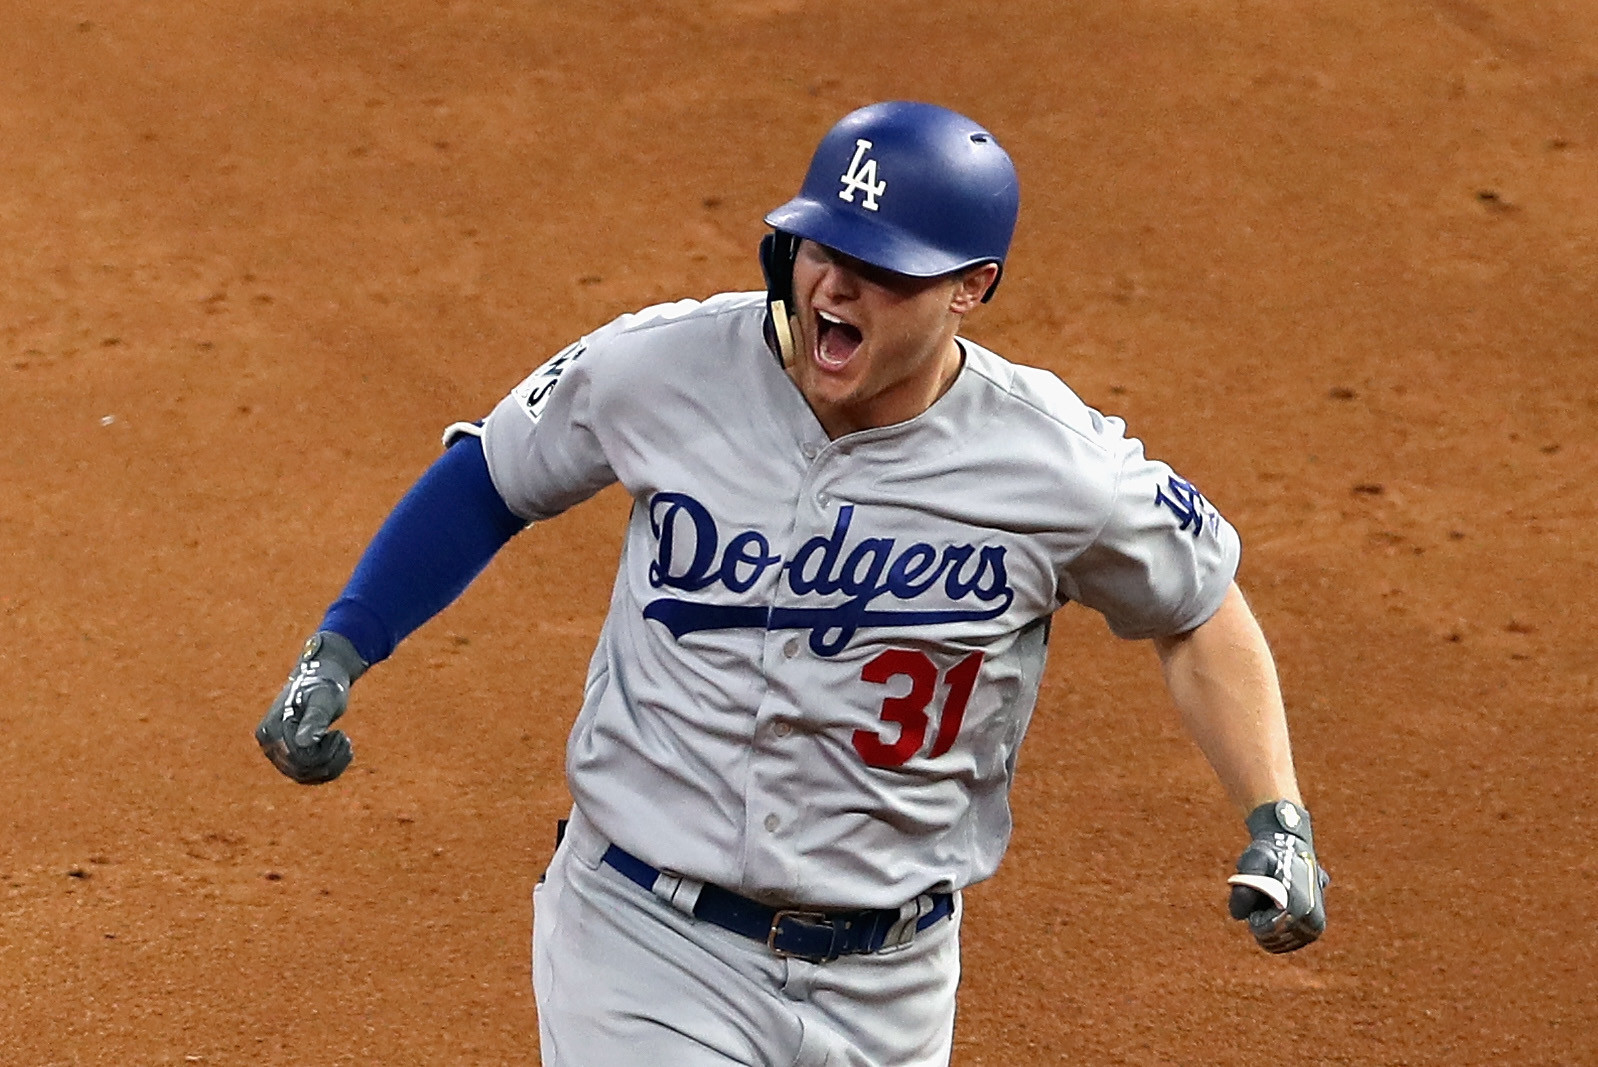 Dodgers Dugout: The rise, fall and rise again of Joc Pederson - LA Times1598 x 1067